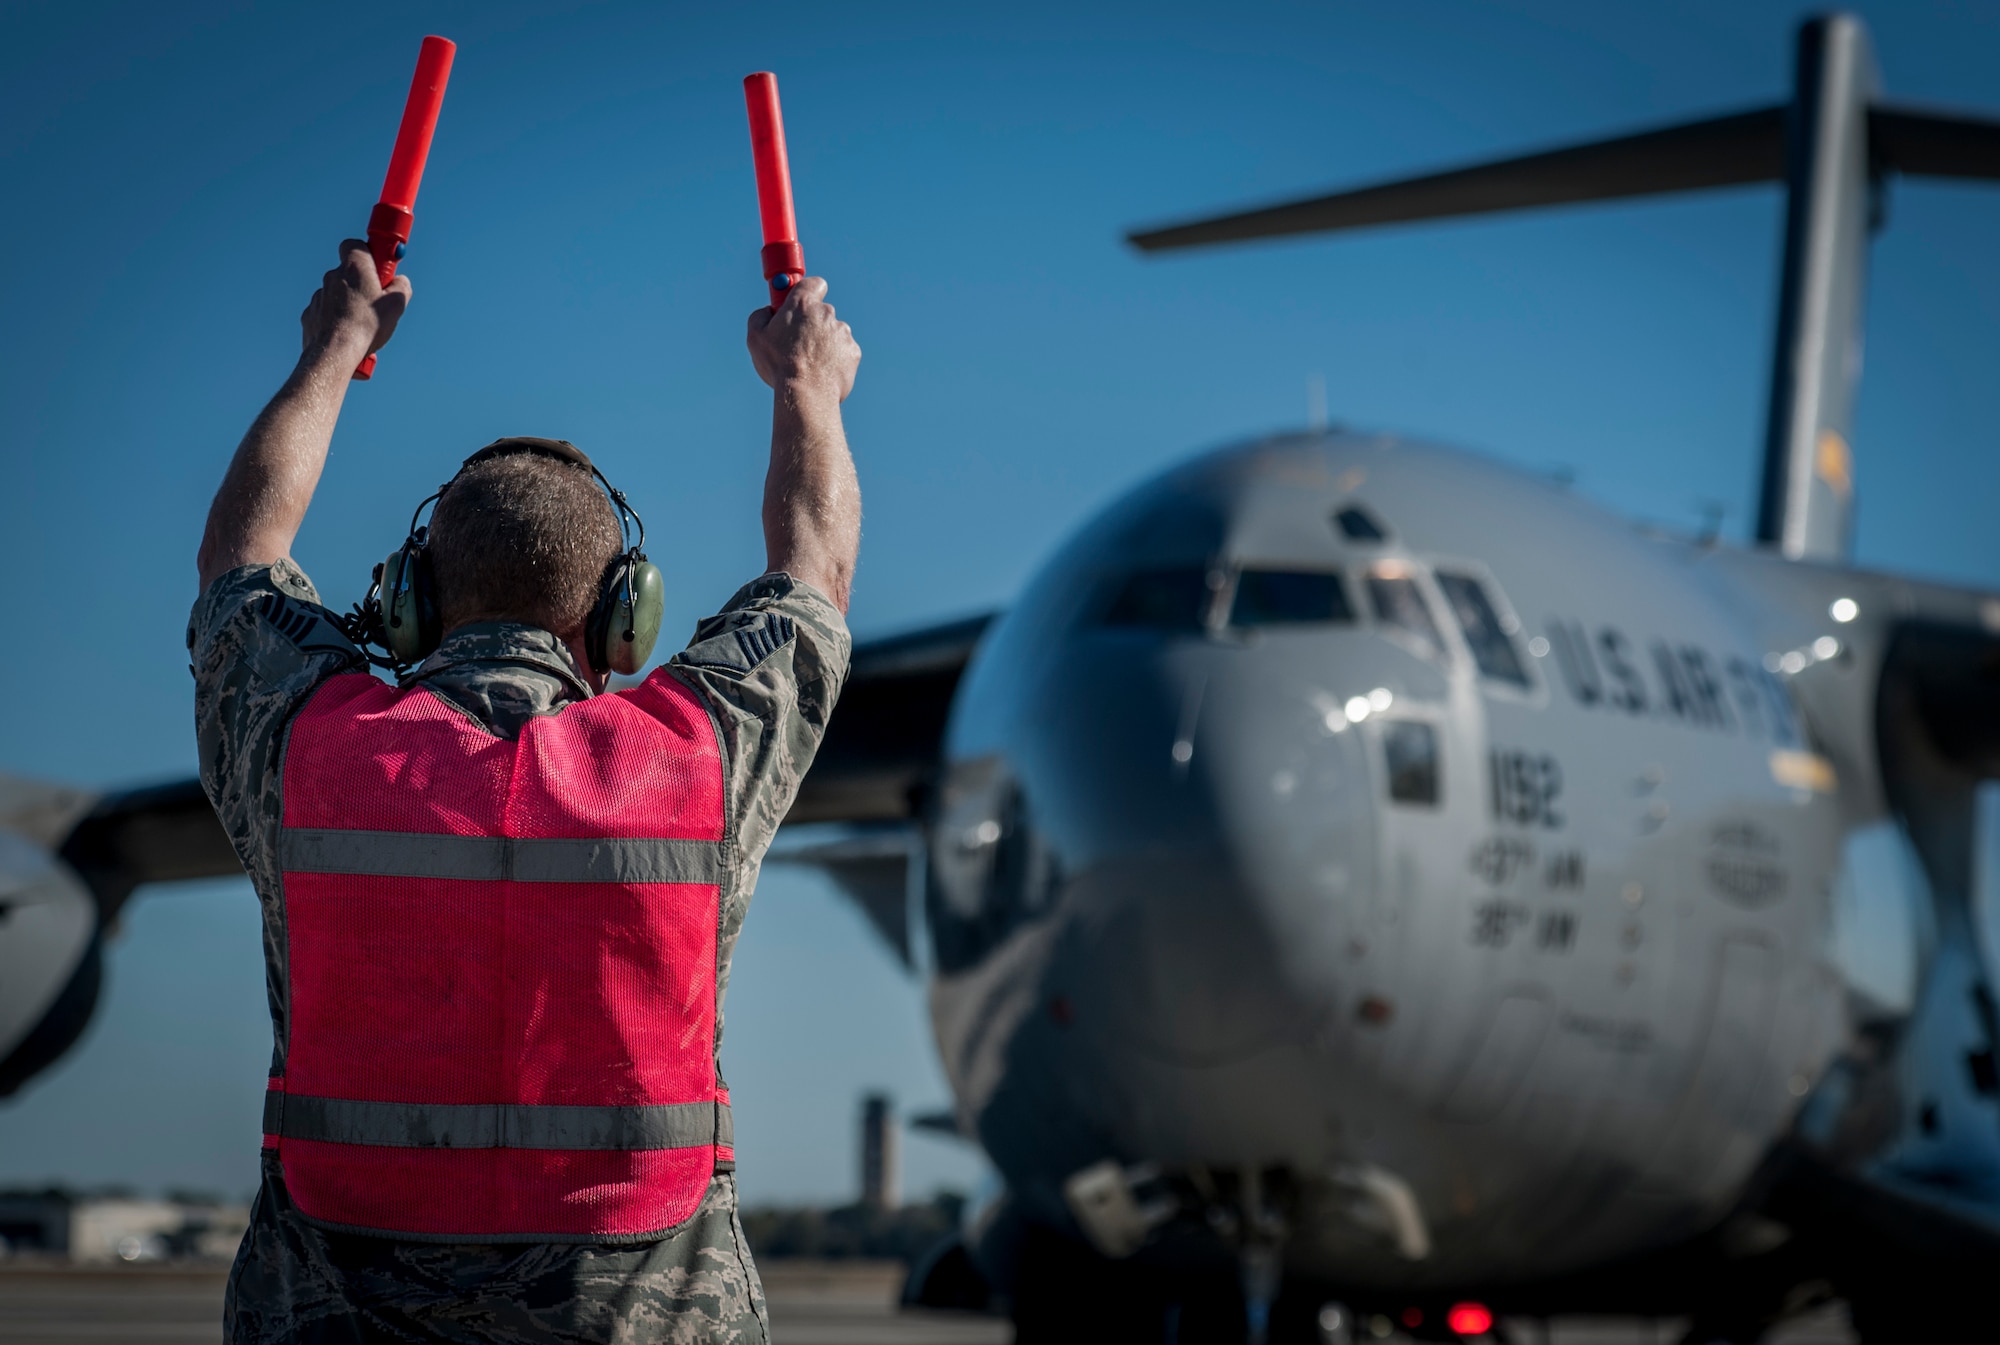 Master Sgt. Horace Bell, 315th Aircraft Maintenance Squadron crew chief, taxis in a C-17 Globemaster III Dec. 18, 2013, at Joint Base Charleston – Air Base, S.C. The aircraft, nicknamed the “Spirit of Charleston” was the first C-17 in the U.S. Air Force’s inventory and has flown missions throughout the world for more than two decades. Those missions have totaled more than 20,000 flight hours. (U.S. Air Force photo / Senior Airman Tom Brading)